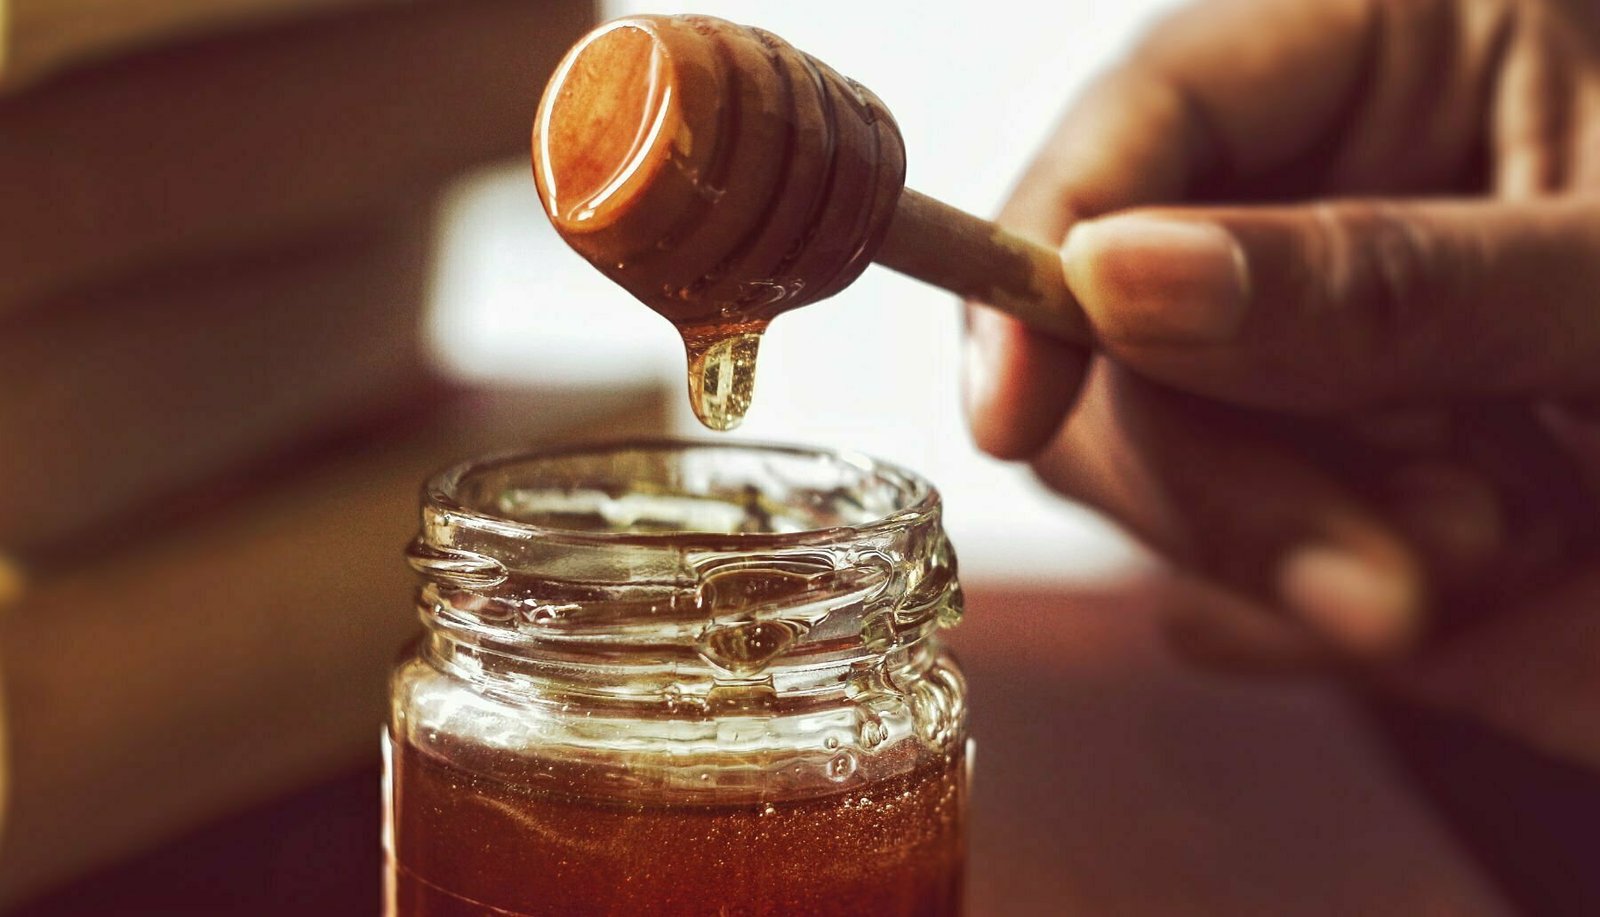 A person with a honey ladel removes some honey from a jar